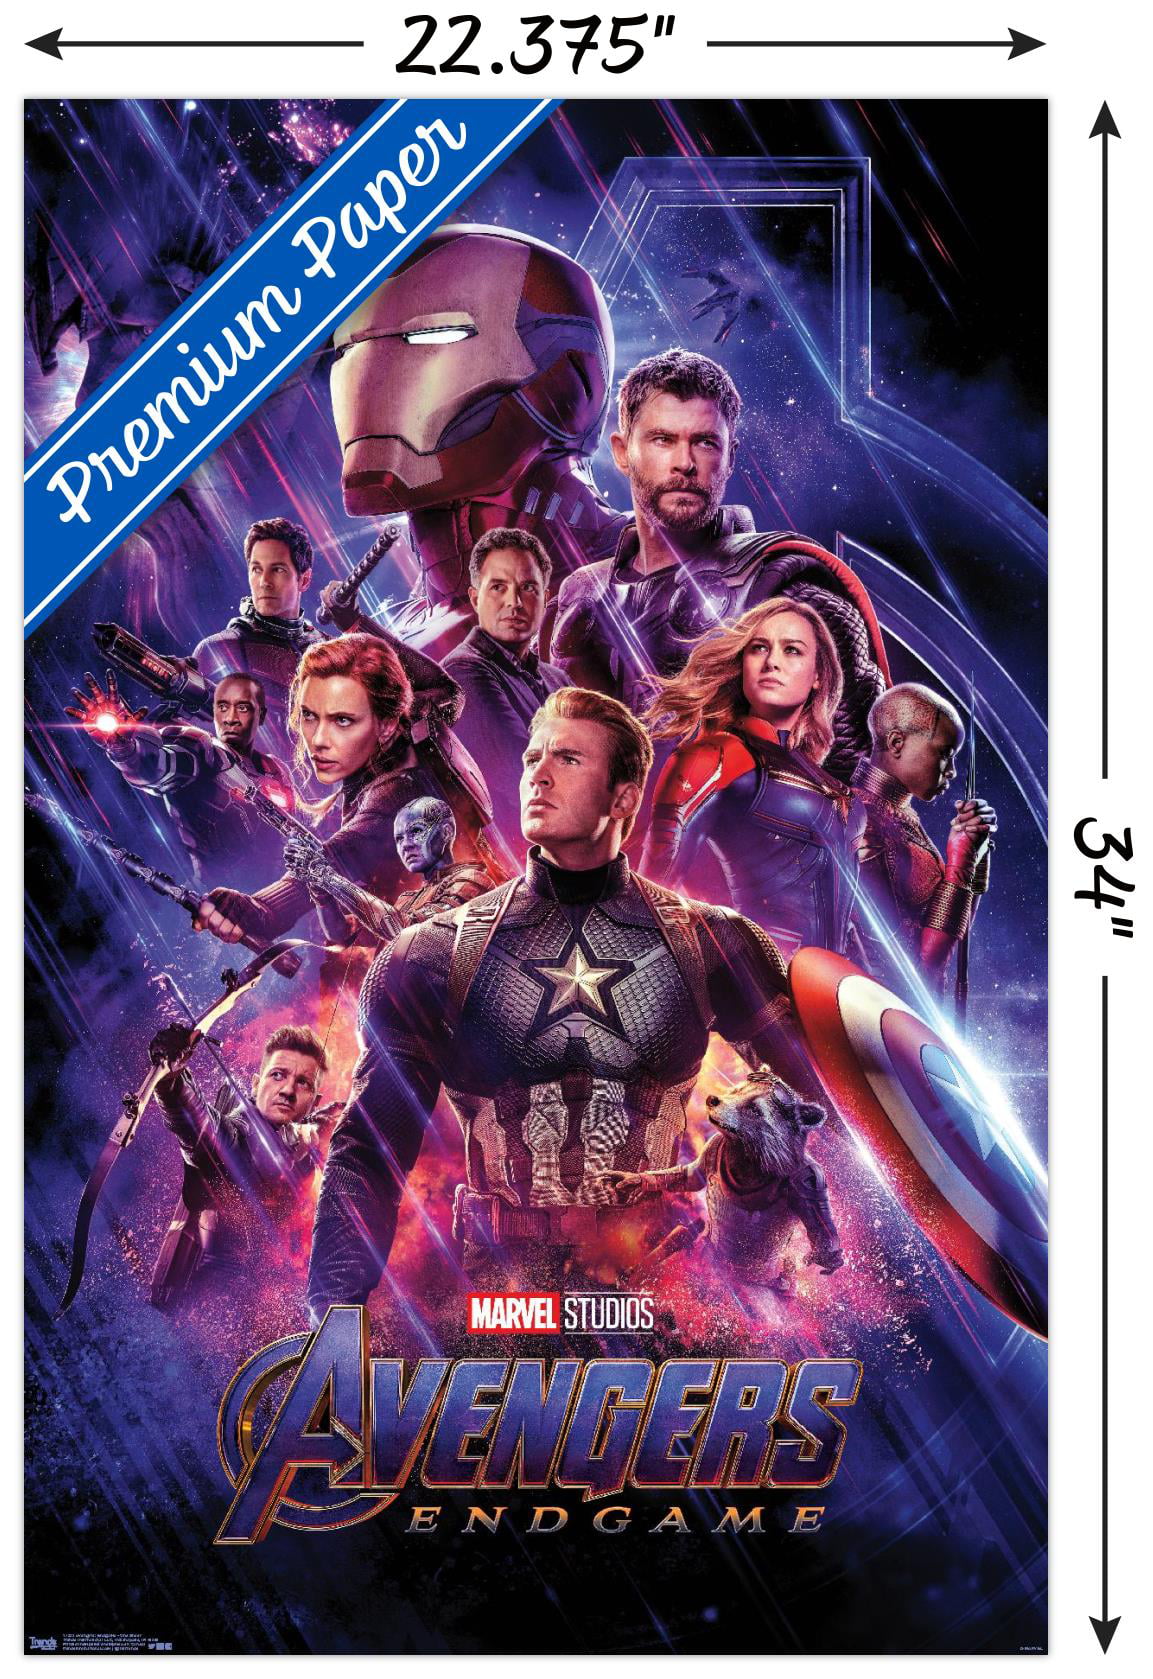 Marvel Studios - Avengers: End Game Poster — CLASSIIFIED